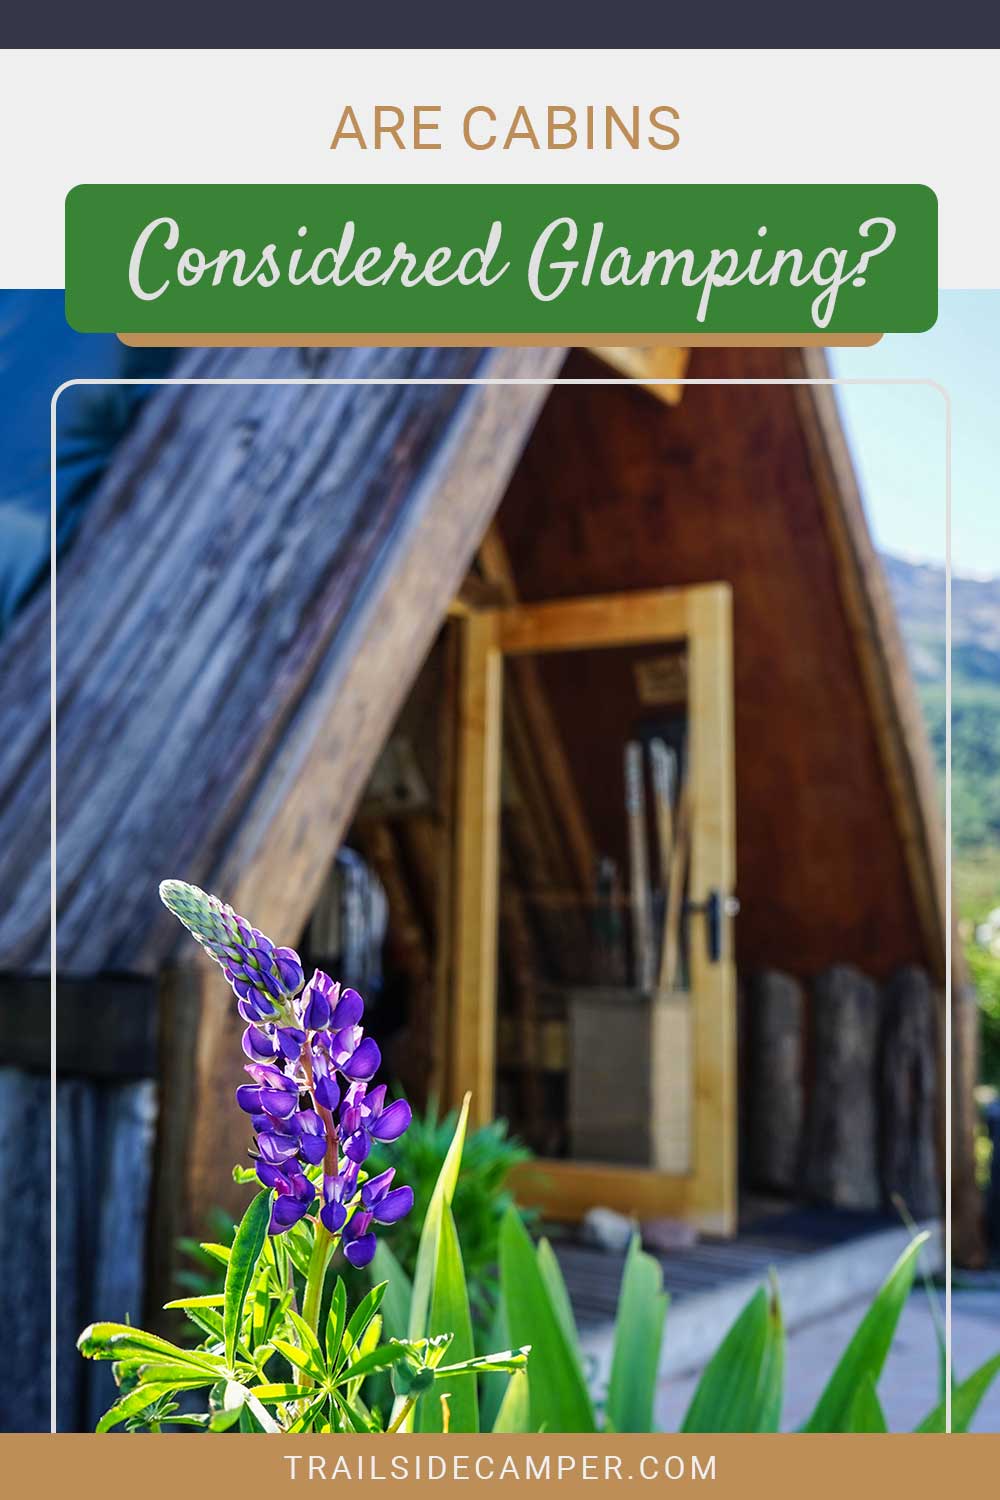 Are Cabins Considered Glamping?